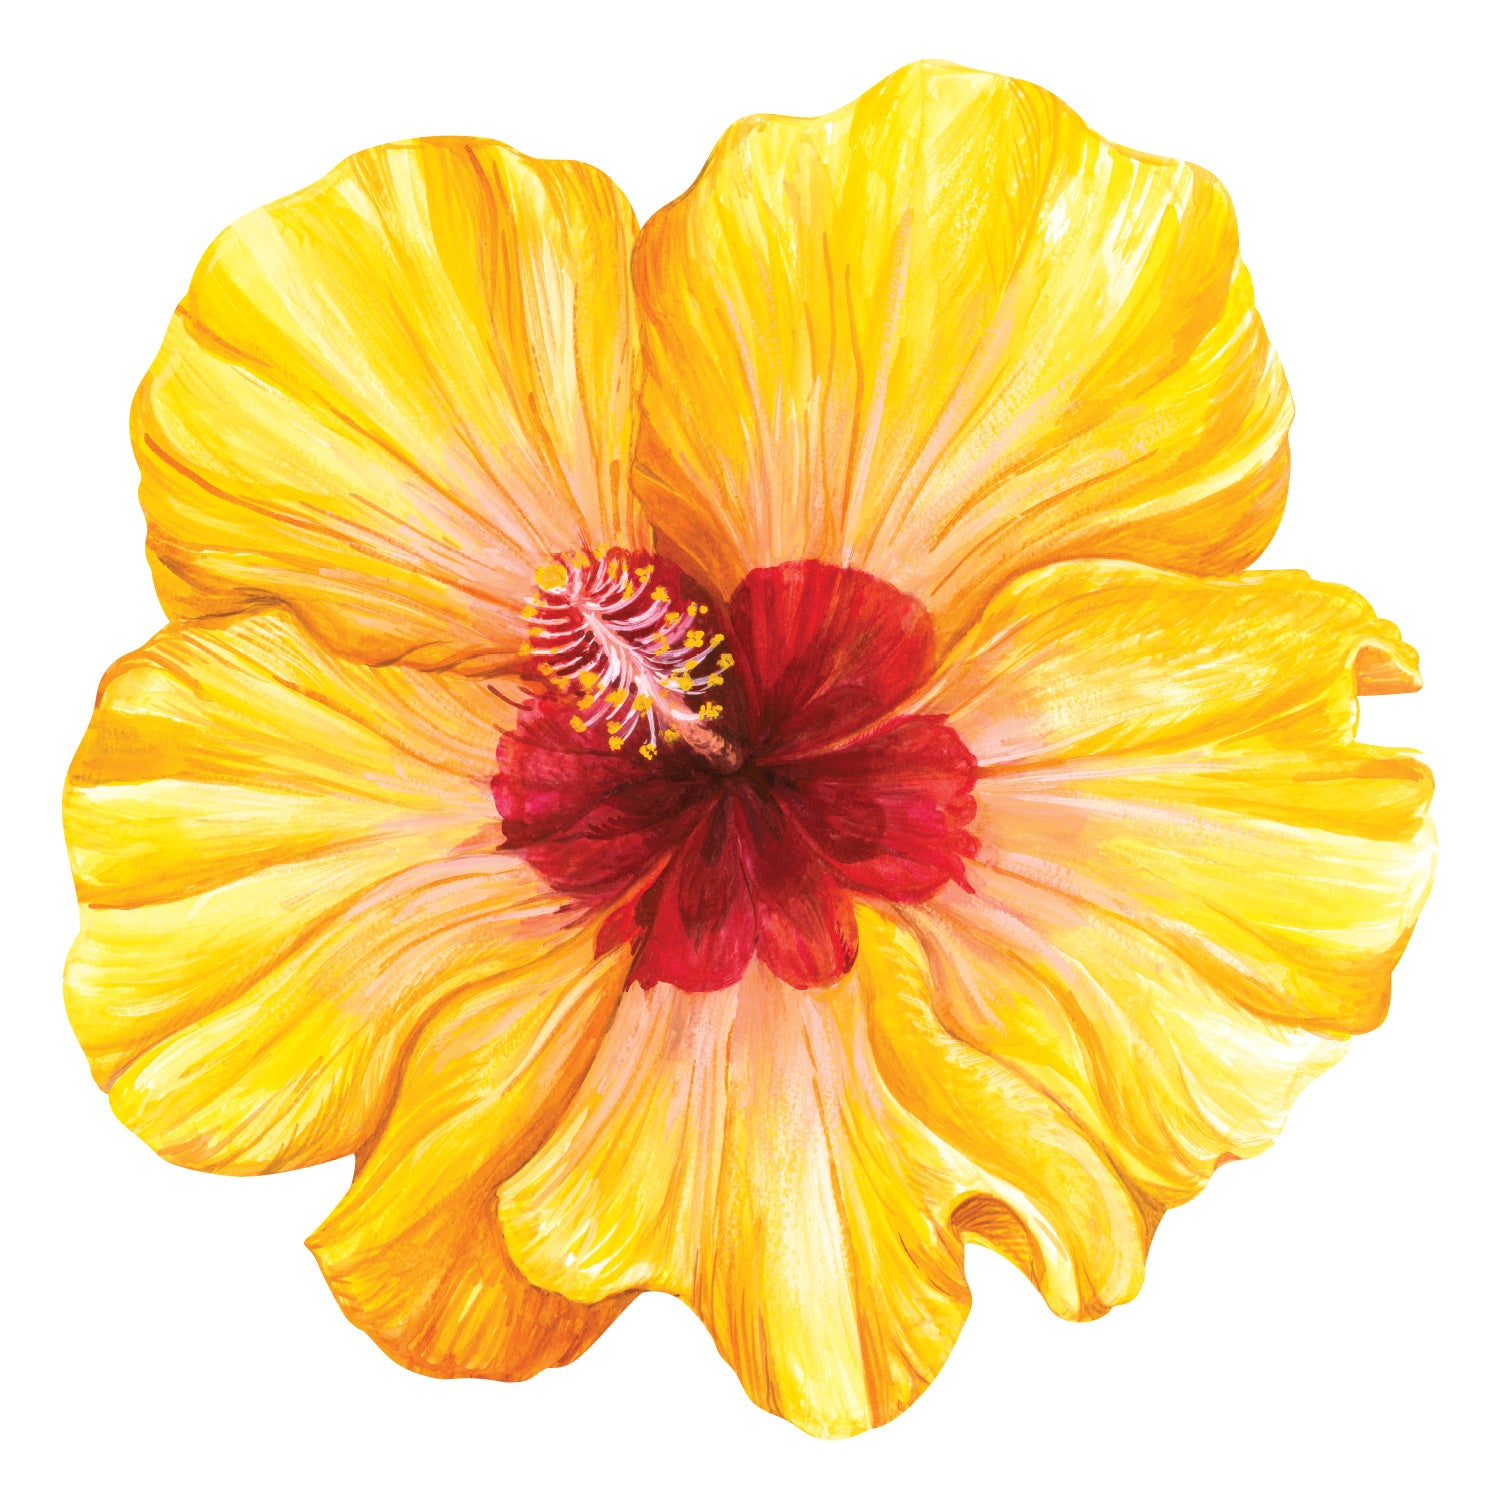 A die-cut illustration of a vibrant yellow and red hibiscus bloom.